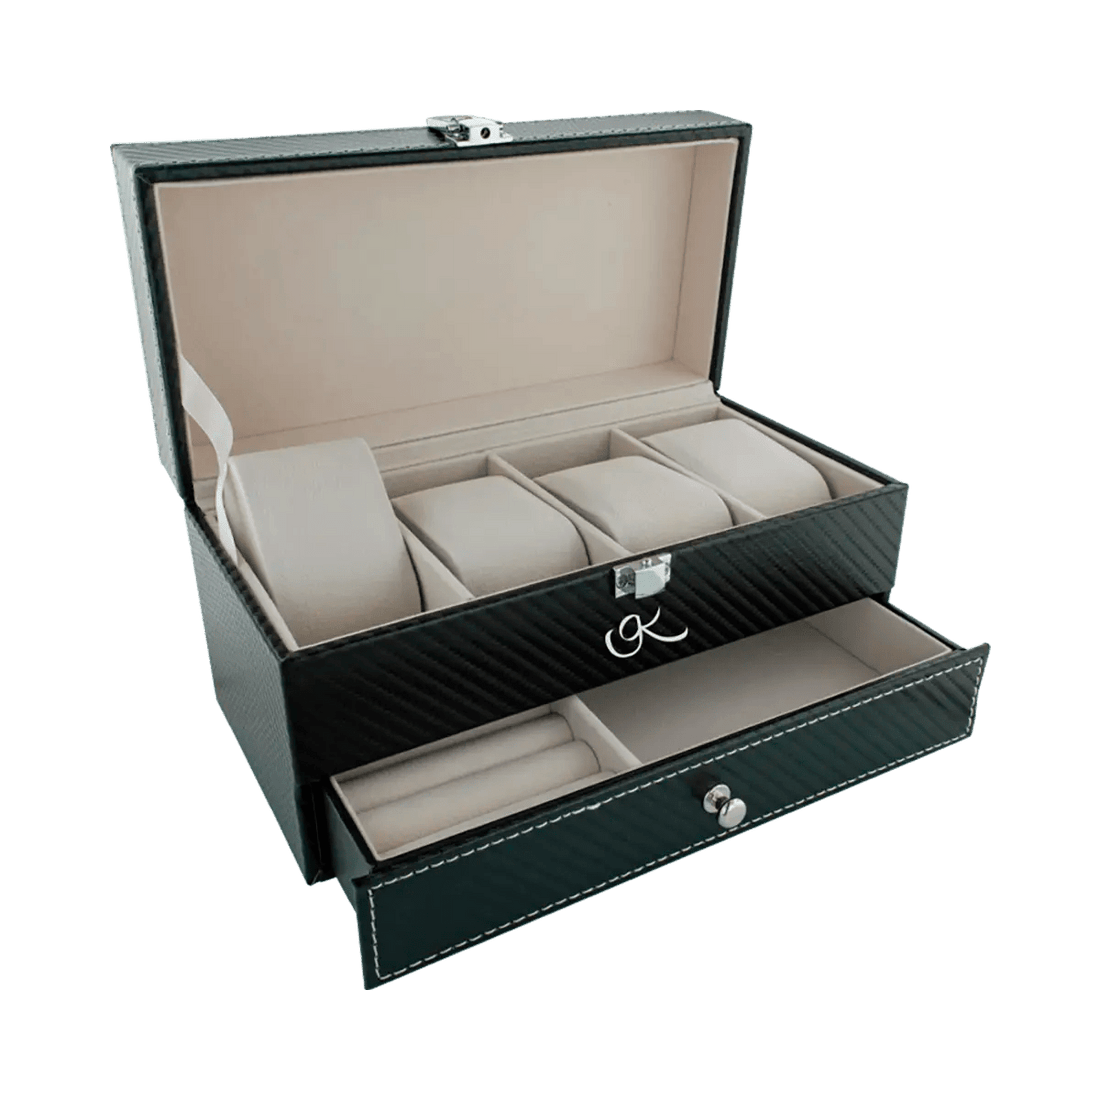 Large Vinyl Jewlery And Watch Box For Men And Women